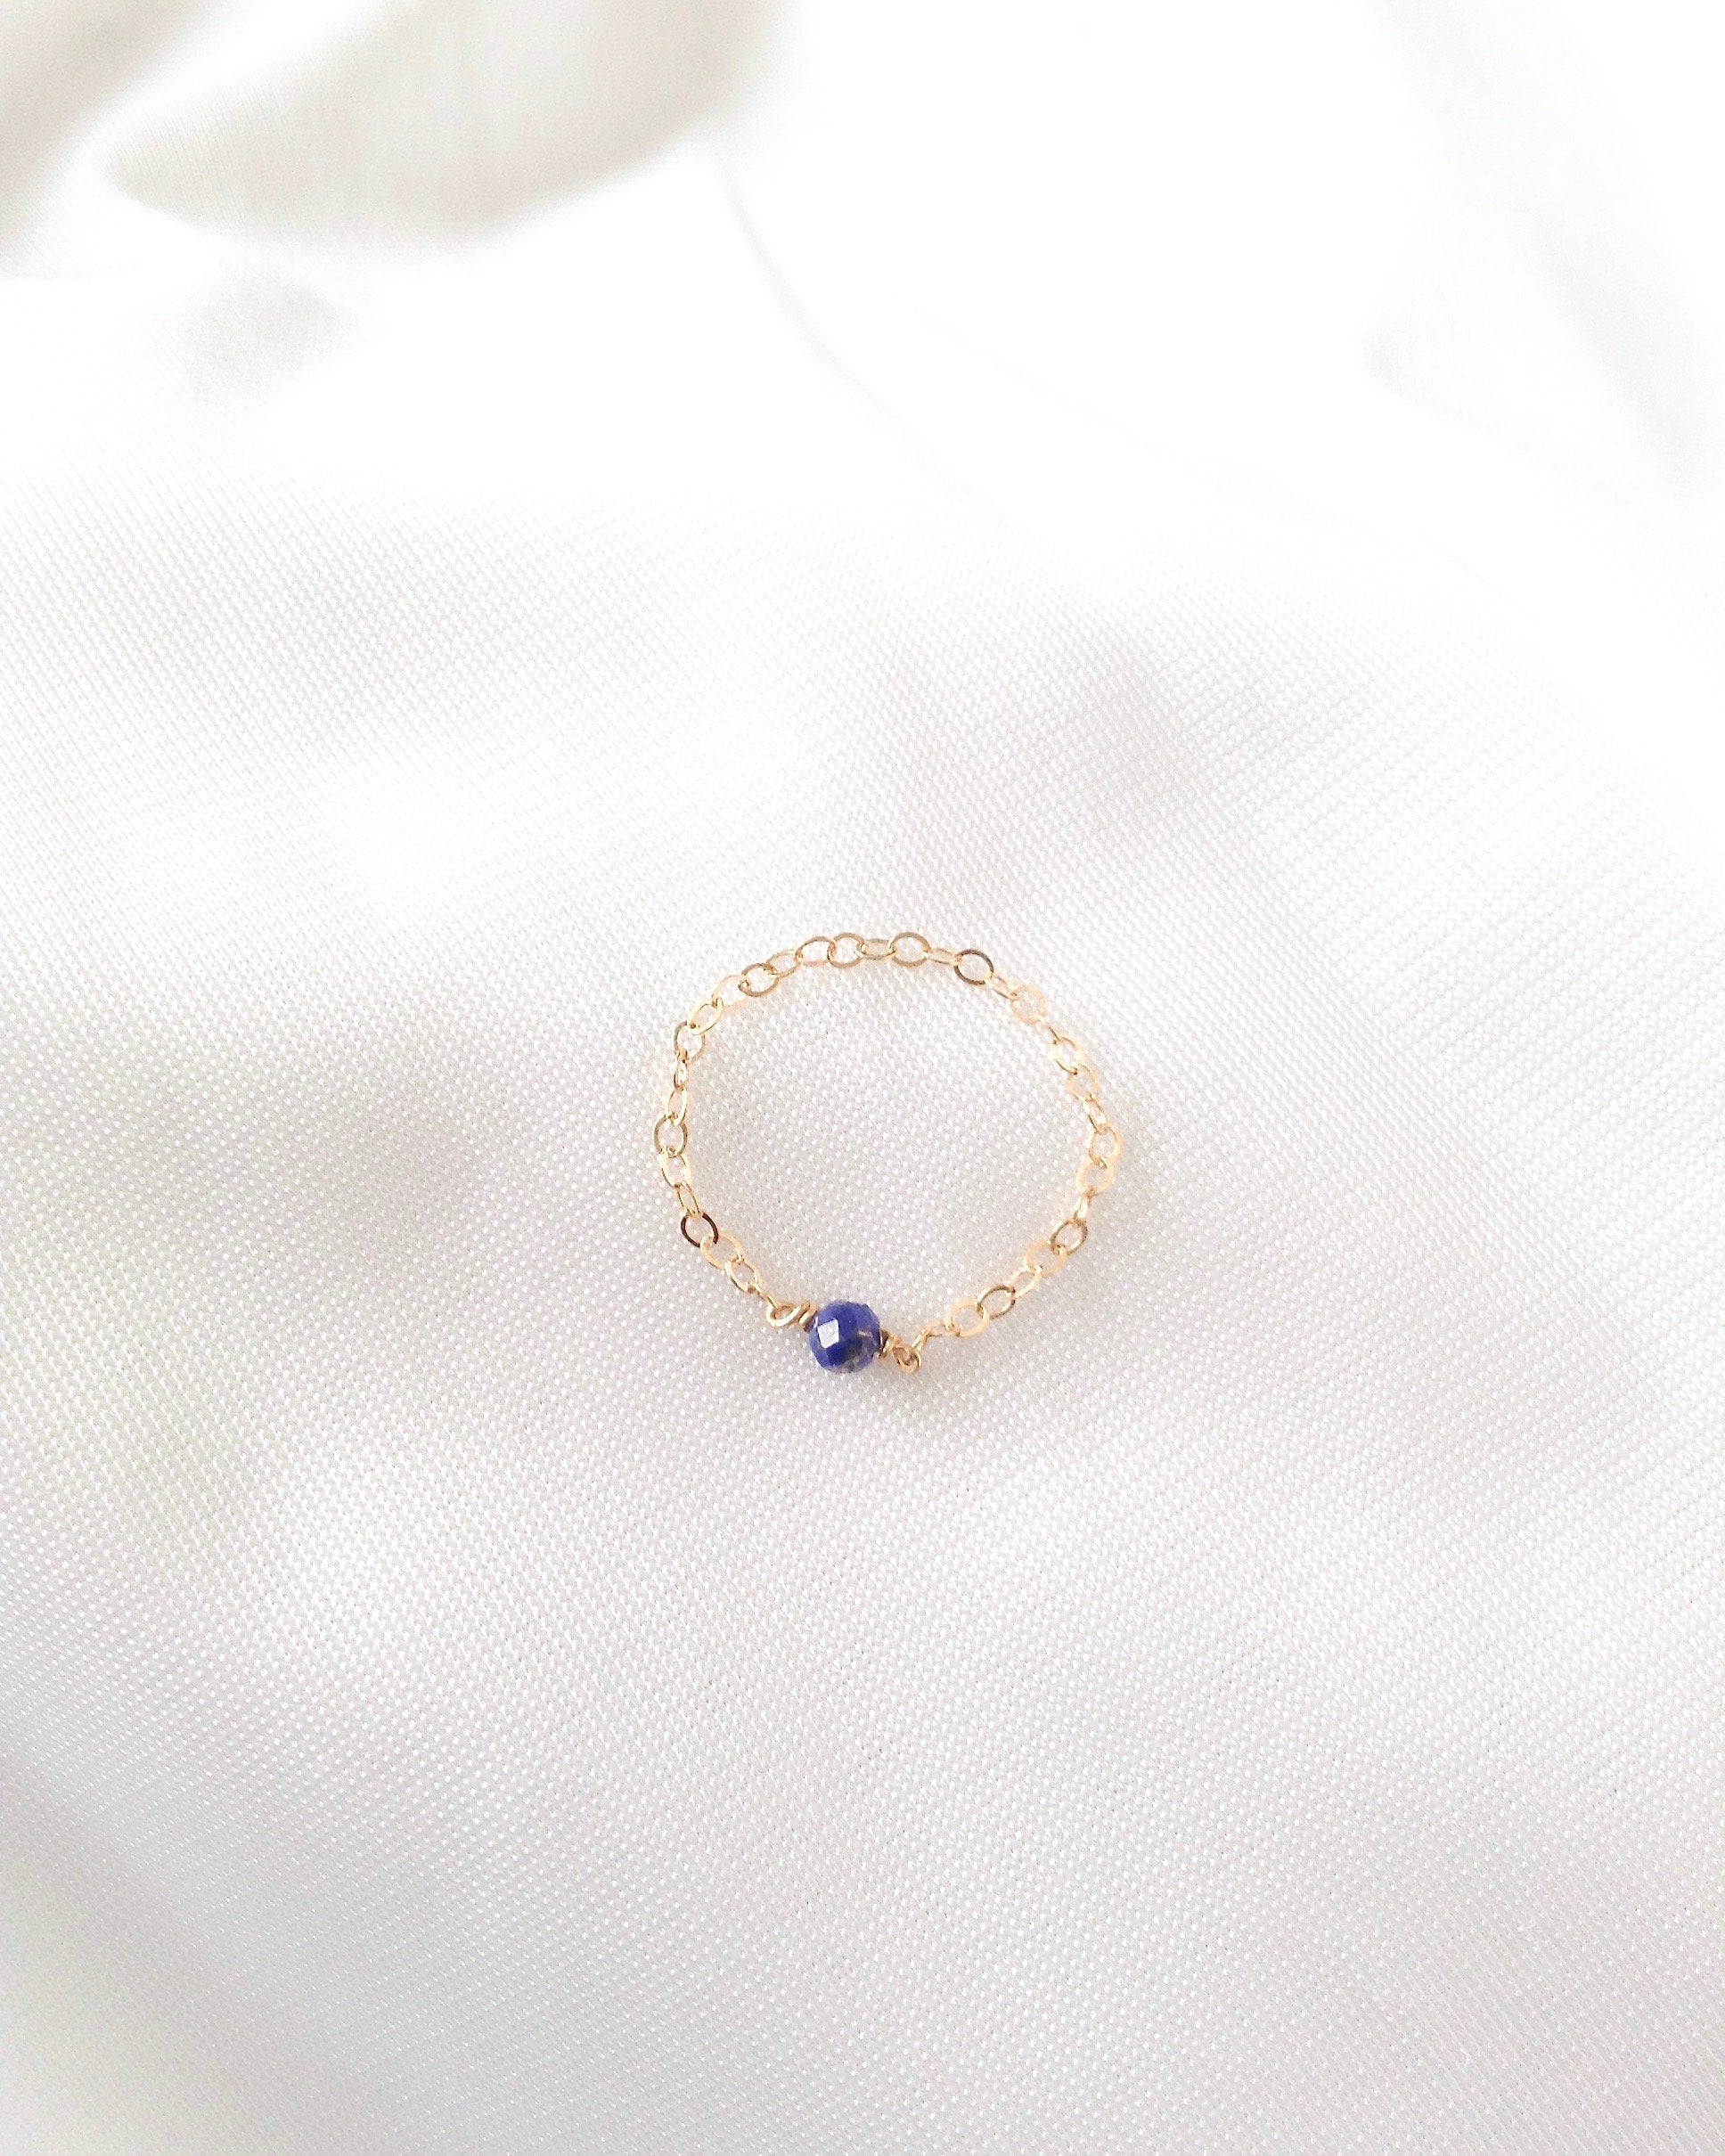 Genuine Lapis Lazuli Dainty Everyday Ring in Gold Filled or Sterling Silver | IB Jewelry